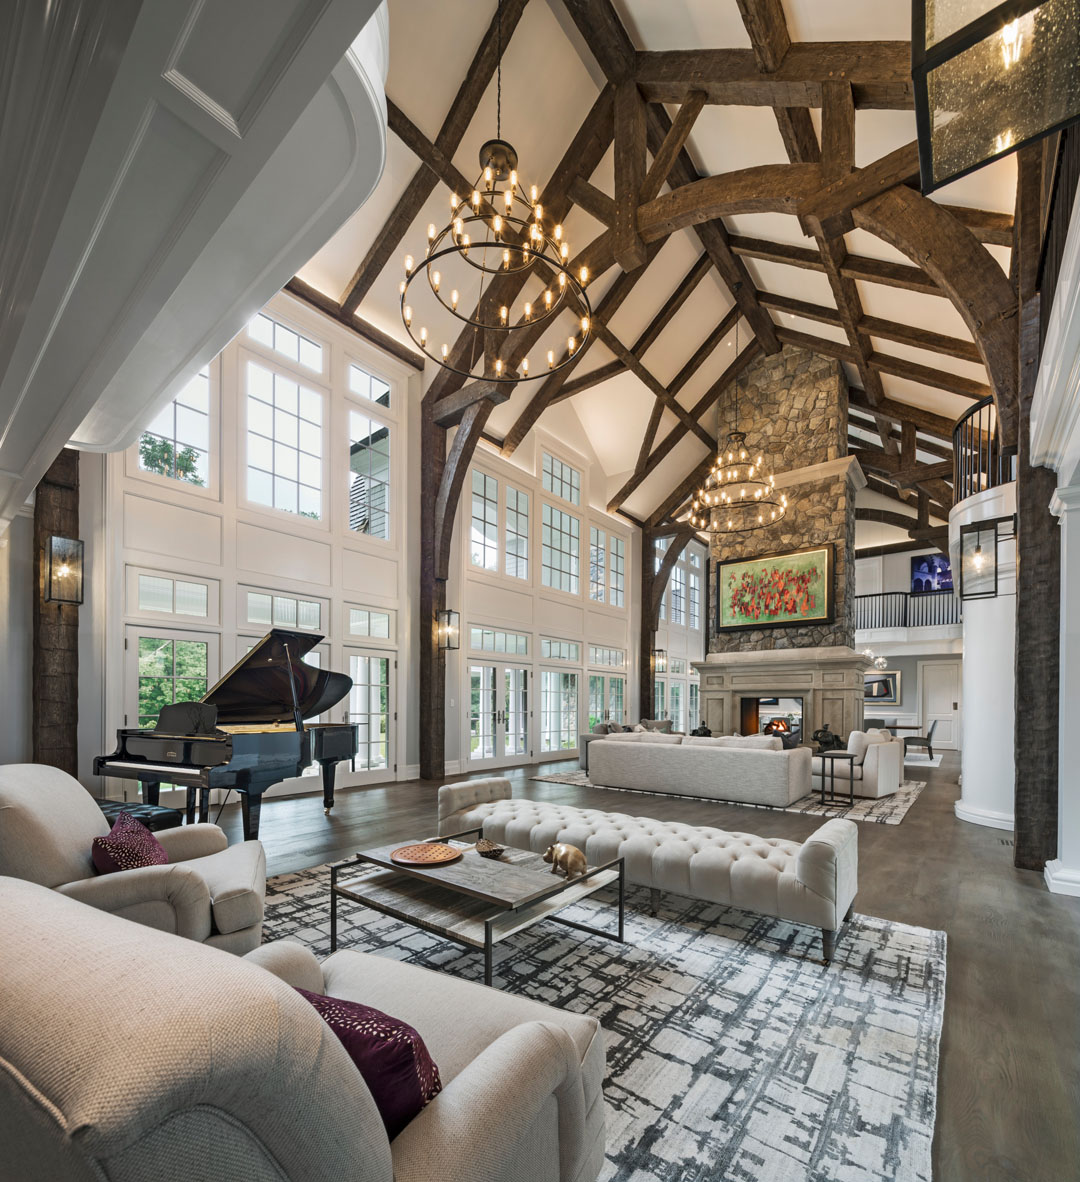 Grand Living Room with Timber Frame Roof Beams